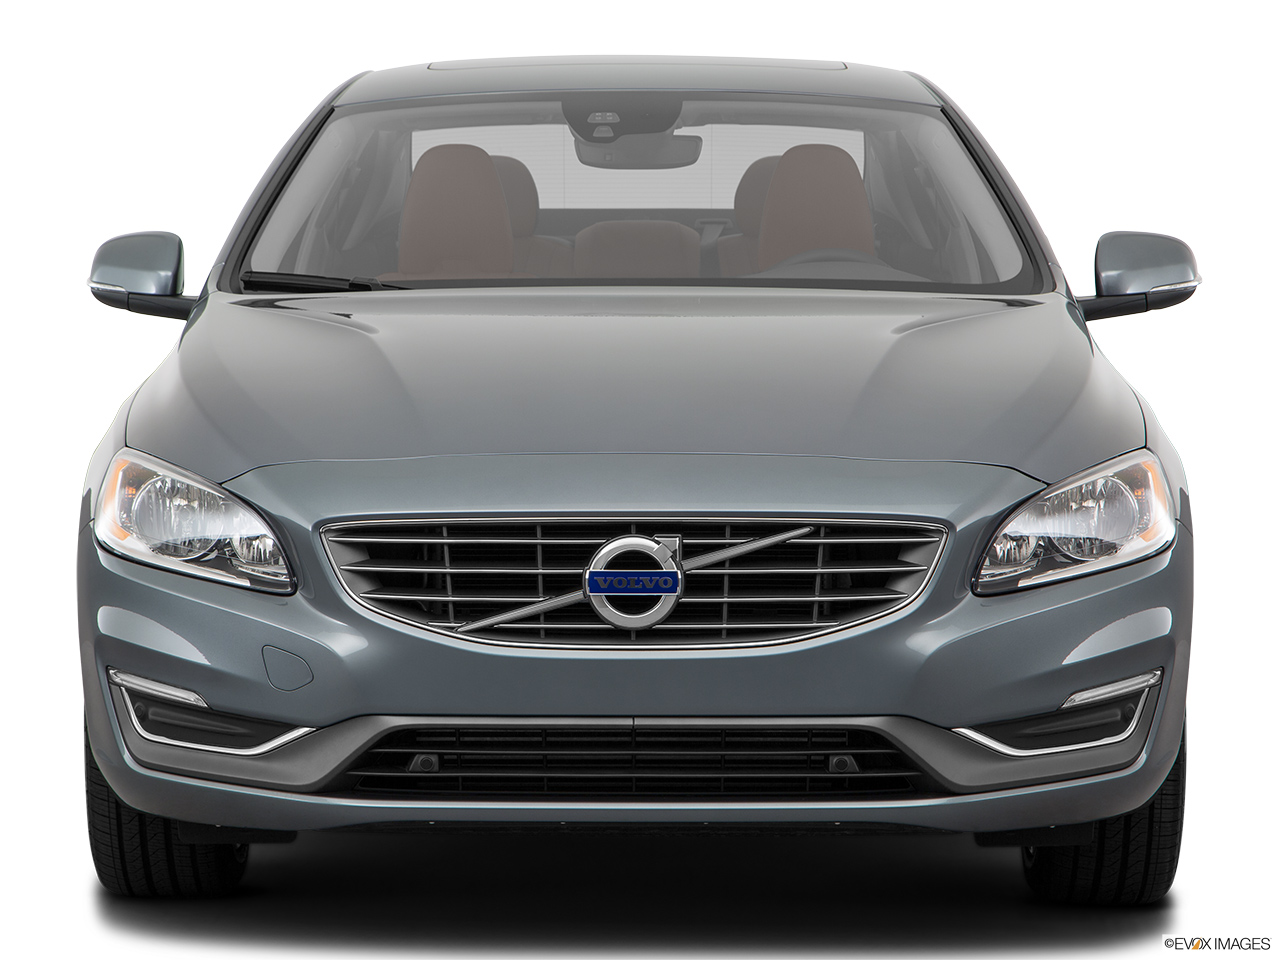 2018 Volvo S60 T5 Inscription Low/wide front. 